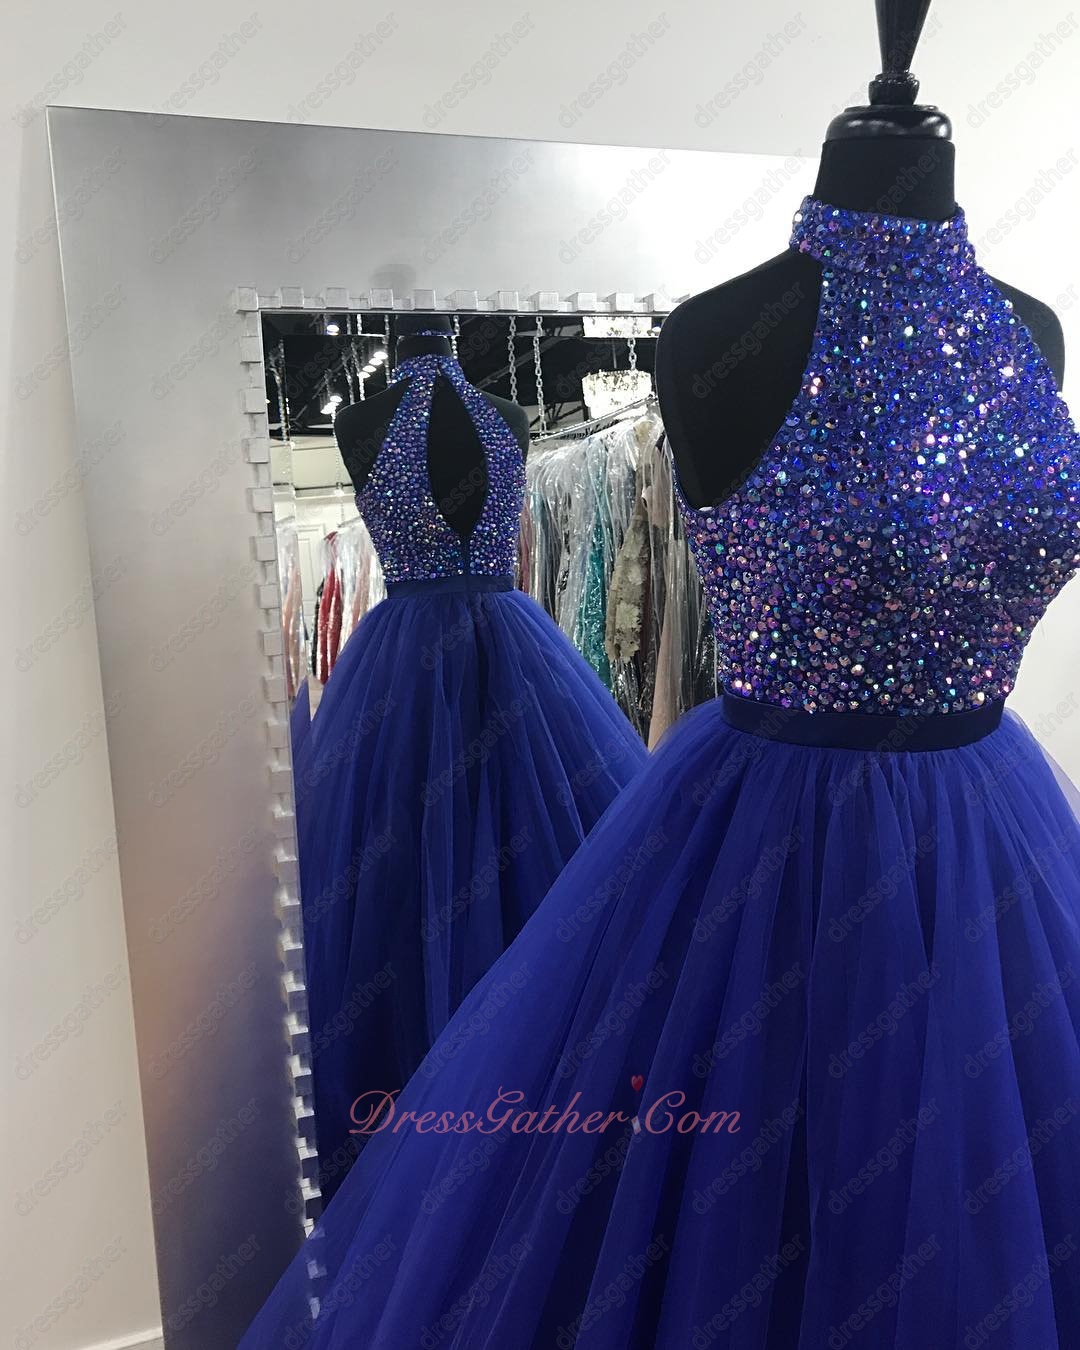 High Collar Colorful Crystals Bodice Royal Blue Tulle Stage Show Gown - Click Image to Close